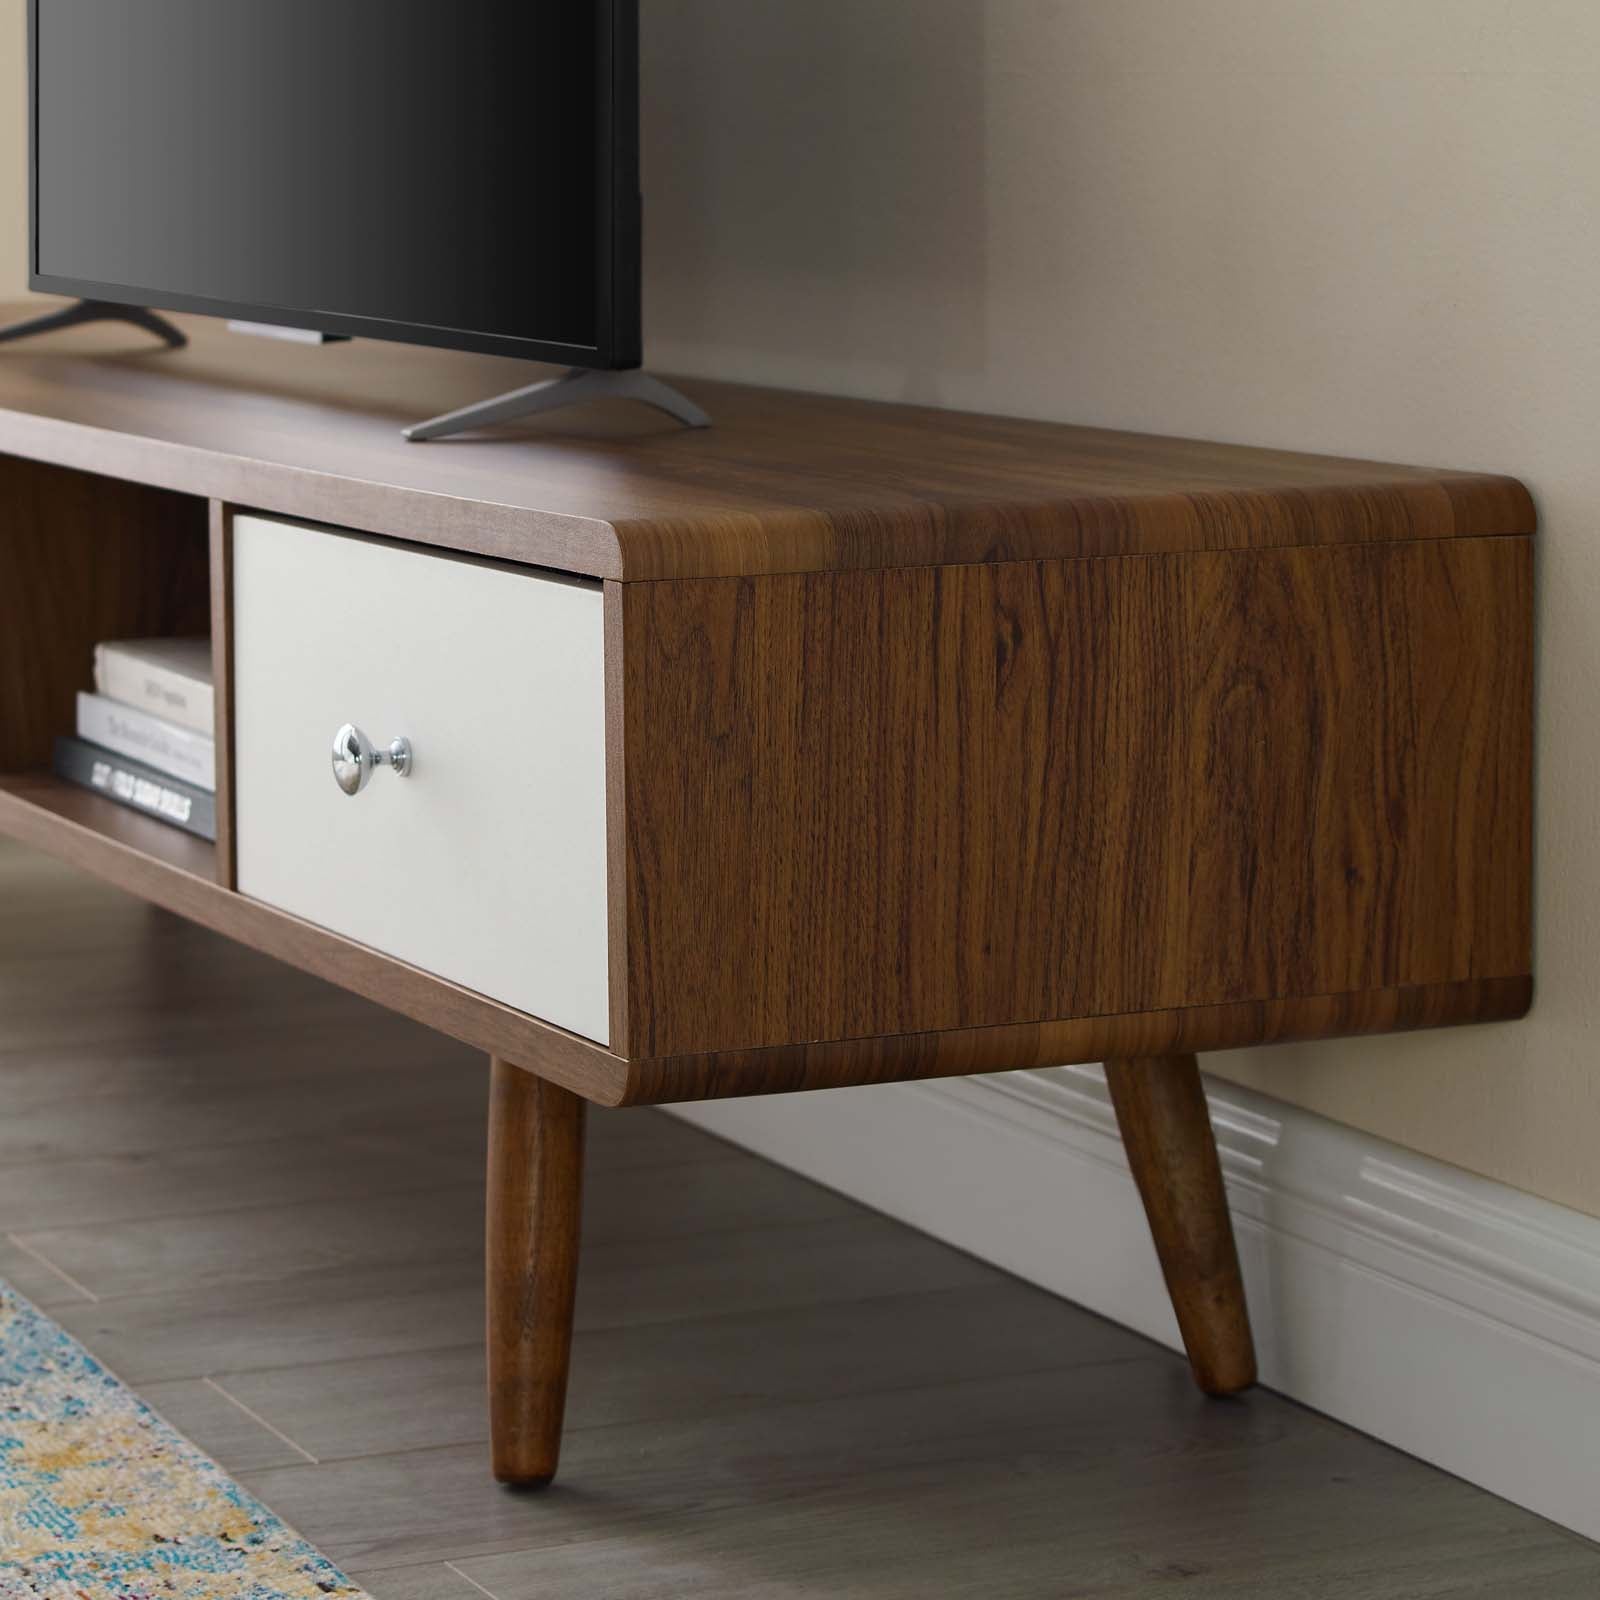 Transmit 70" Media Console Wood TV Stand